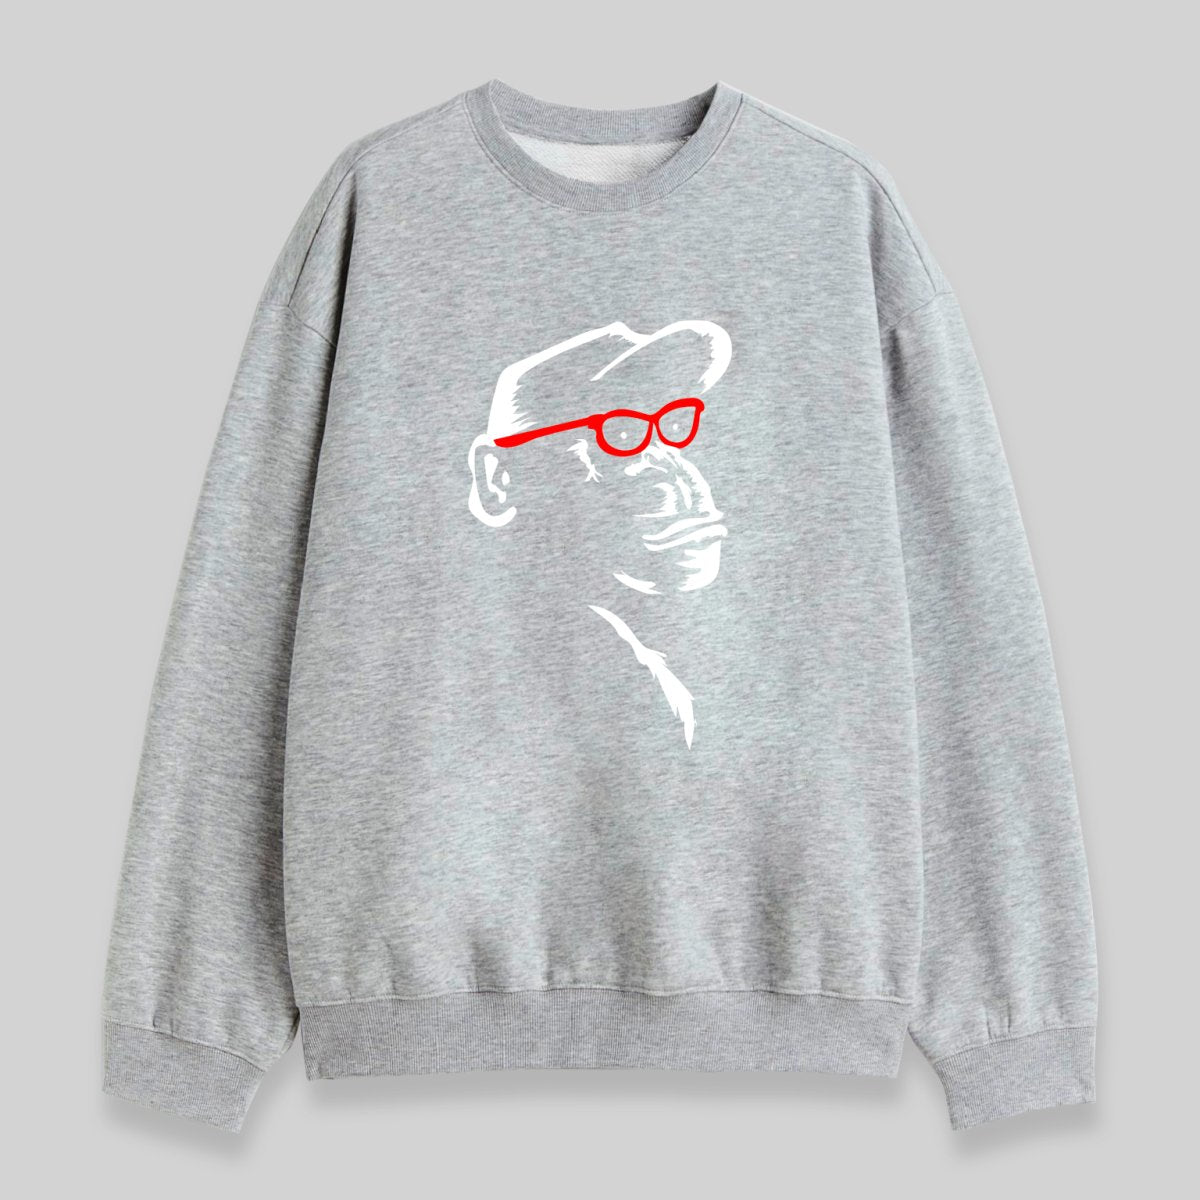 Monkey With Red Glasses Sweatshirt - Geeksoutfit